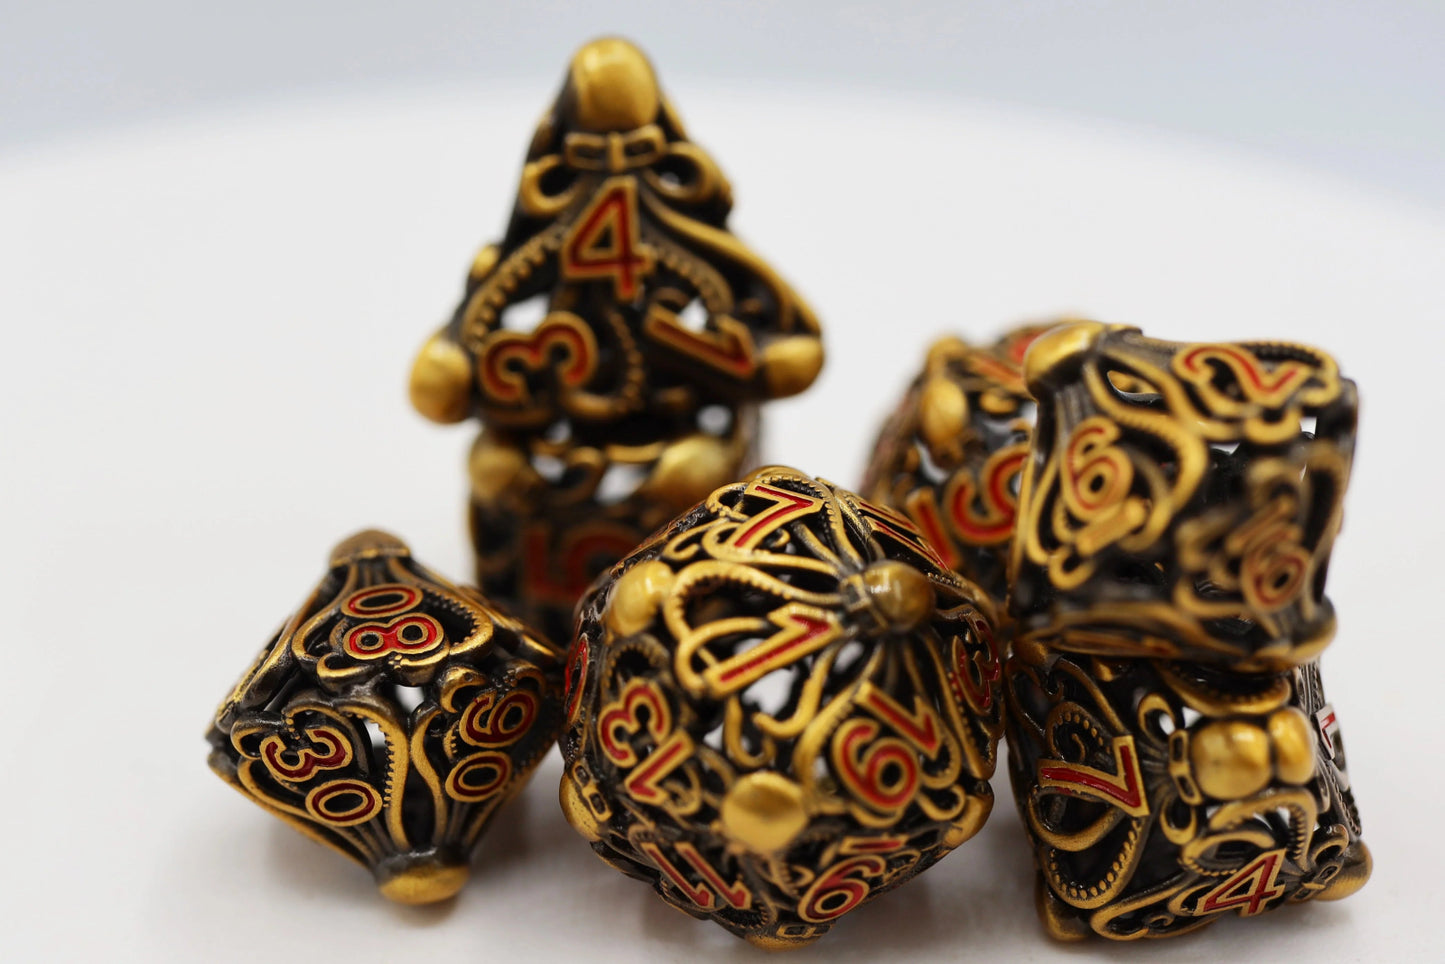 Mind Eater: Gold - Hollow Metal RPG Dice Set - The Fourth Place